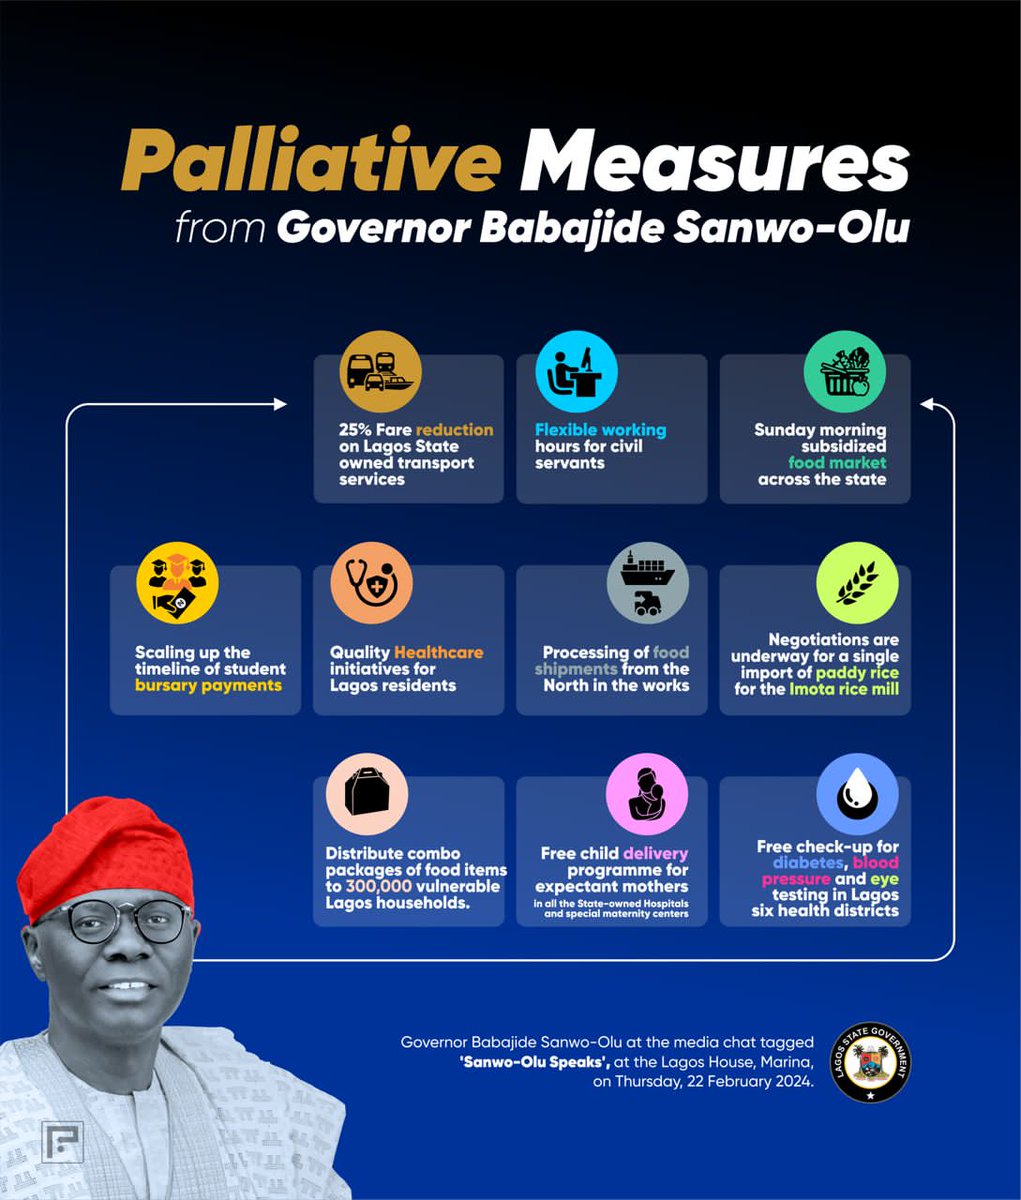 Palliative measures from Governor Babajide Sanwo-Olu

1. 25% fare reduction on Lagos State owned transport services. 

2. Flexible working hours for civil servants, teachers to get succor. 

3. Sunday morning subsidized food market across the state.
 
#SanwoSpeaks 
#LagosCares